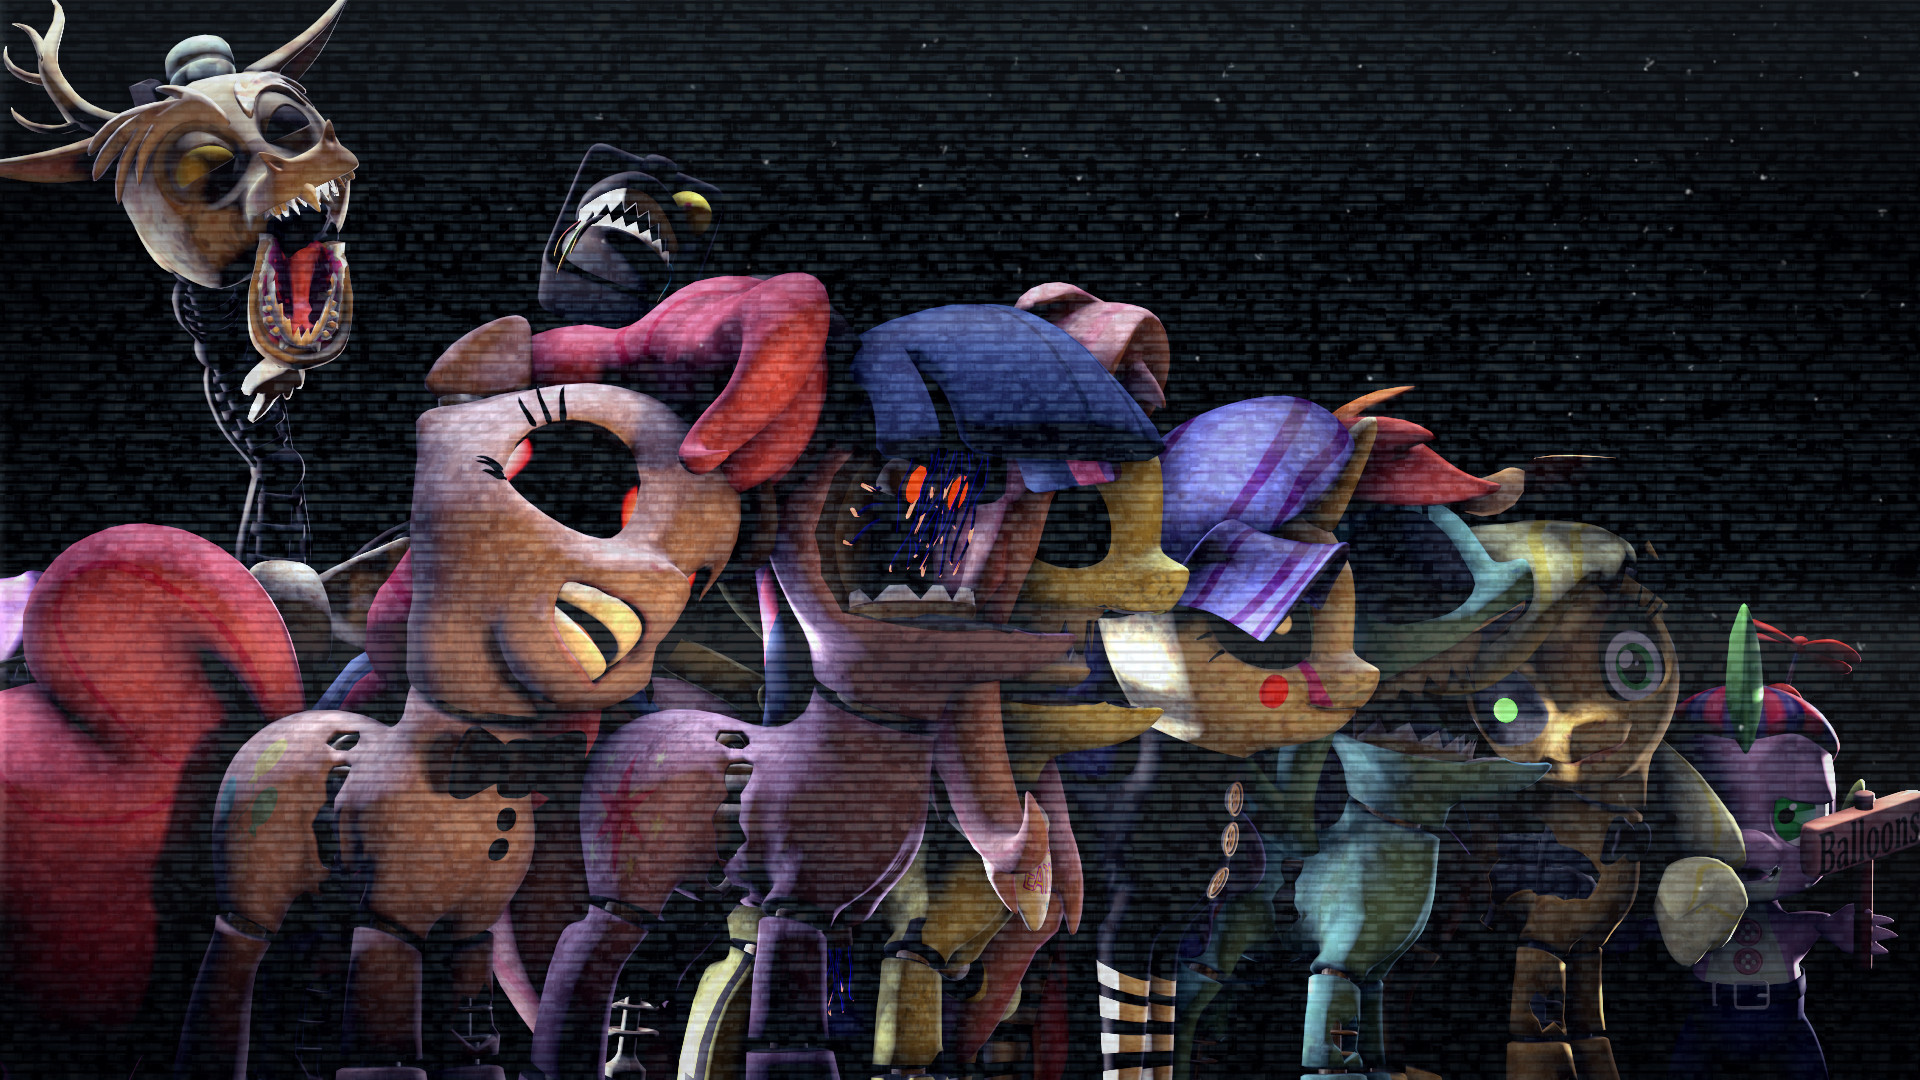 LunarGuardWhoof Five nights at Equestria 2 – withered animatronics by LunarGuardWhoof